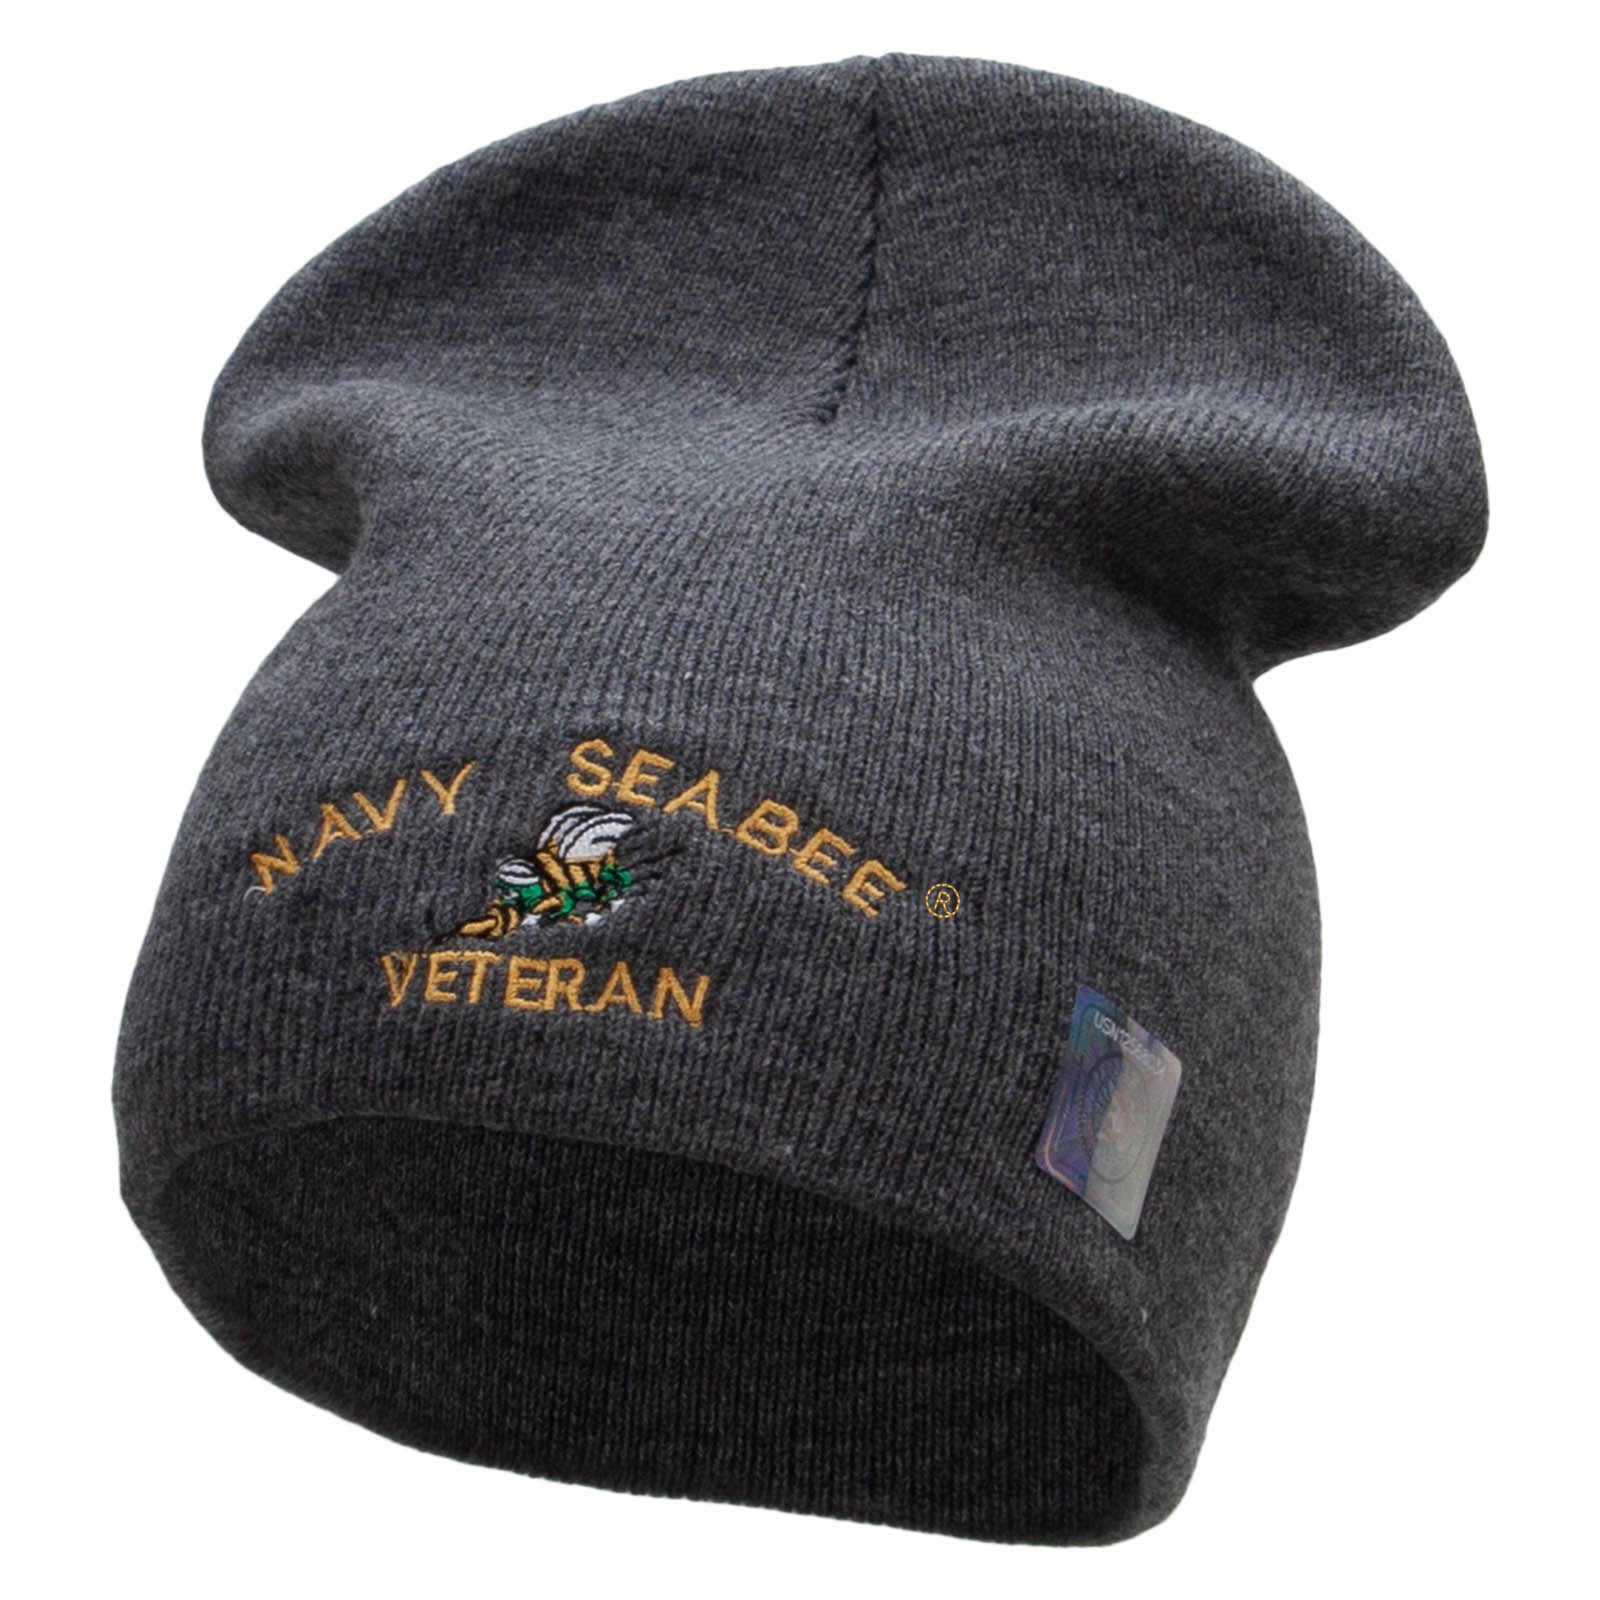 Licensed Navy Seabee Veteran Embroidered Short Beanie Made in USA - Charcoal OSFM